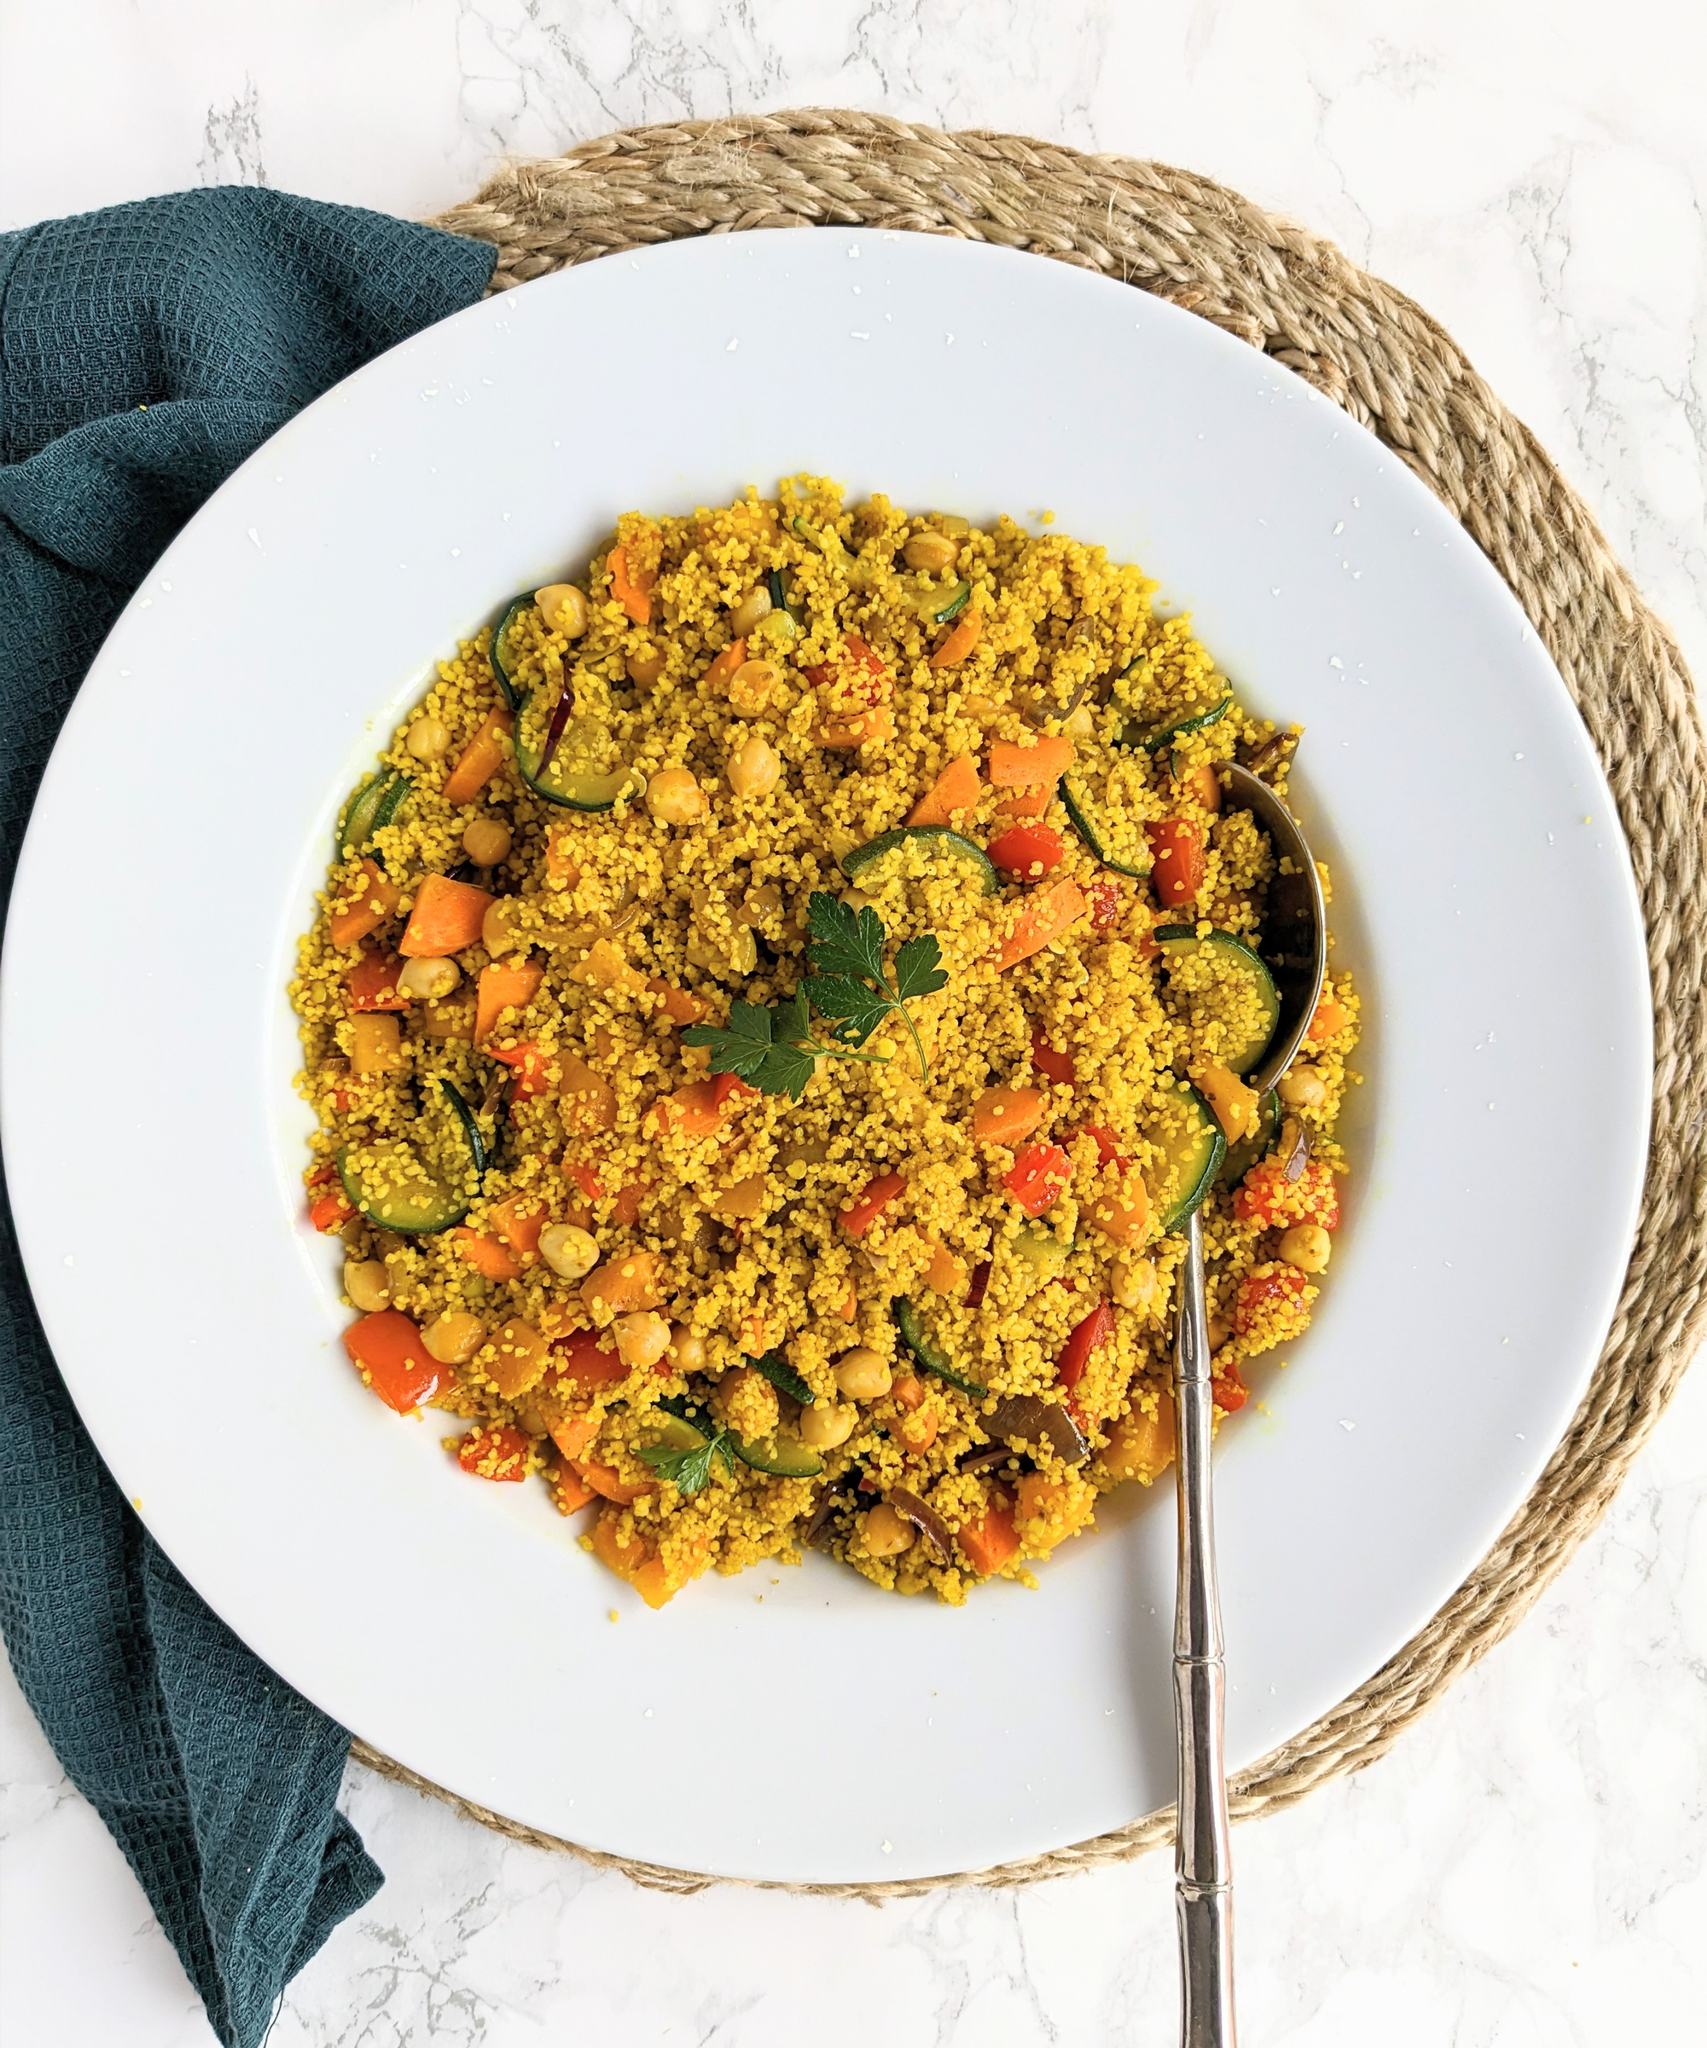 Couscous and Vegetables